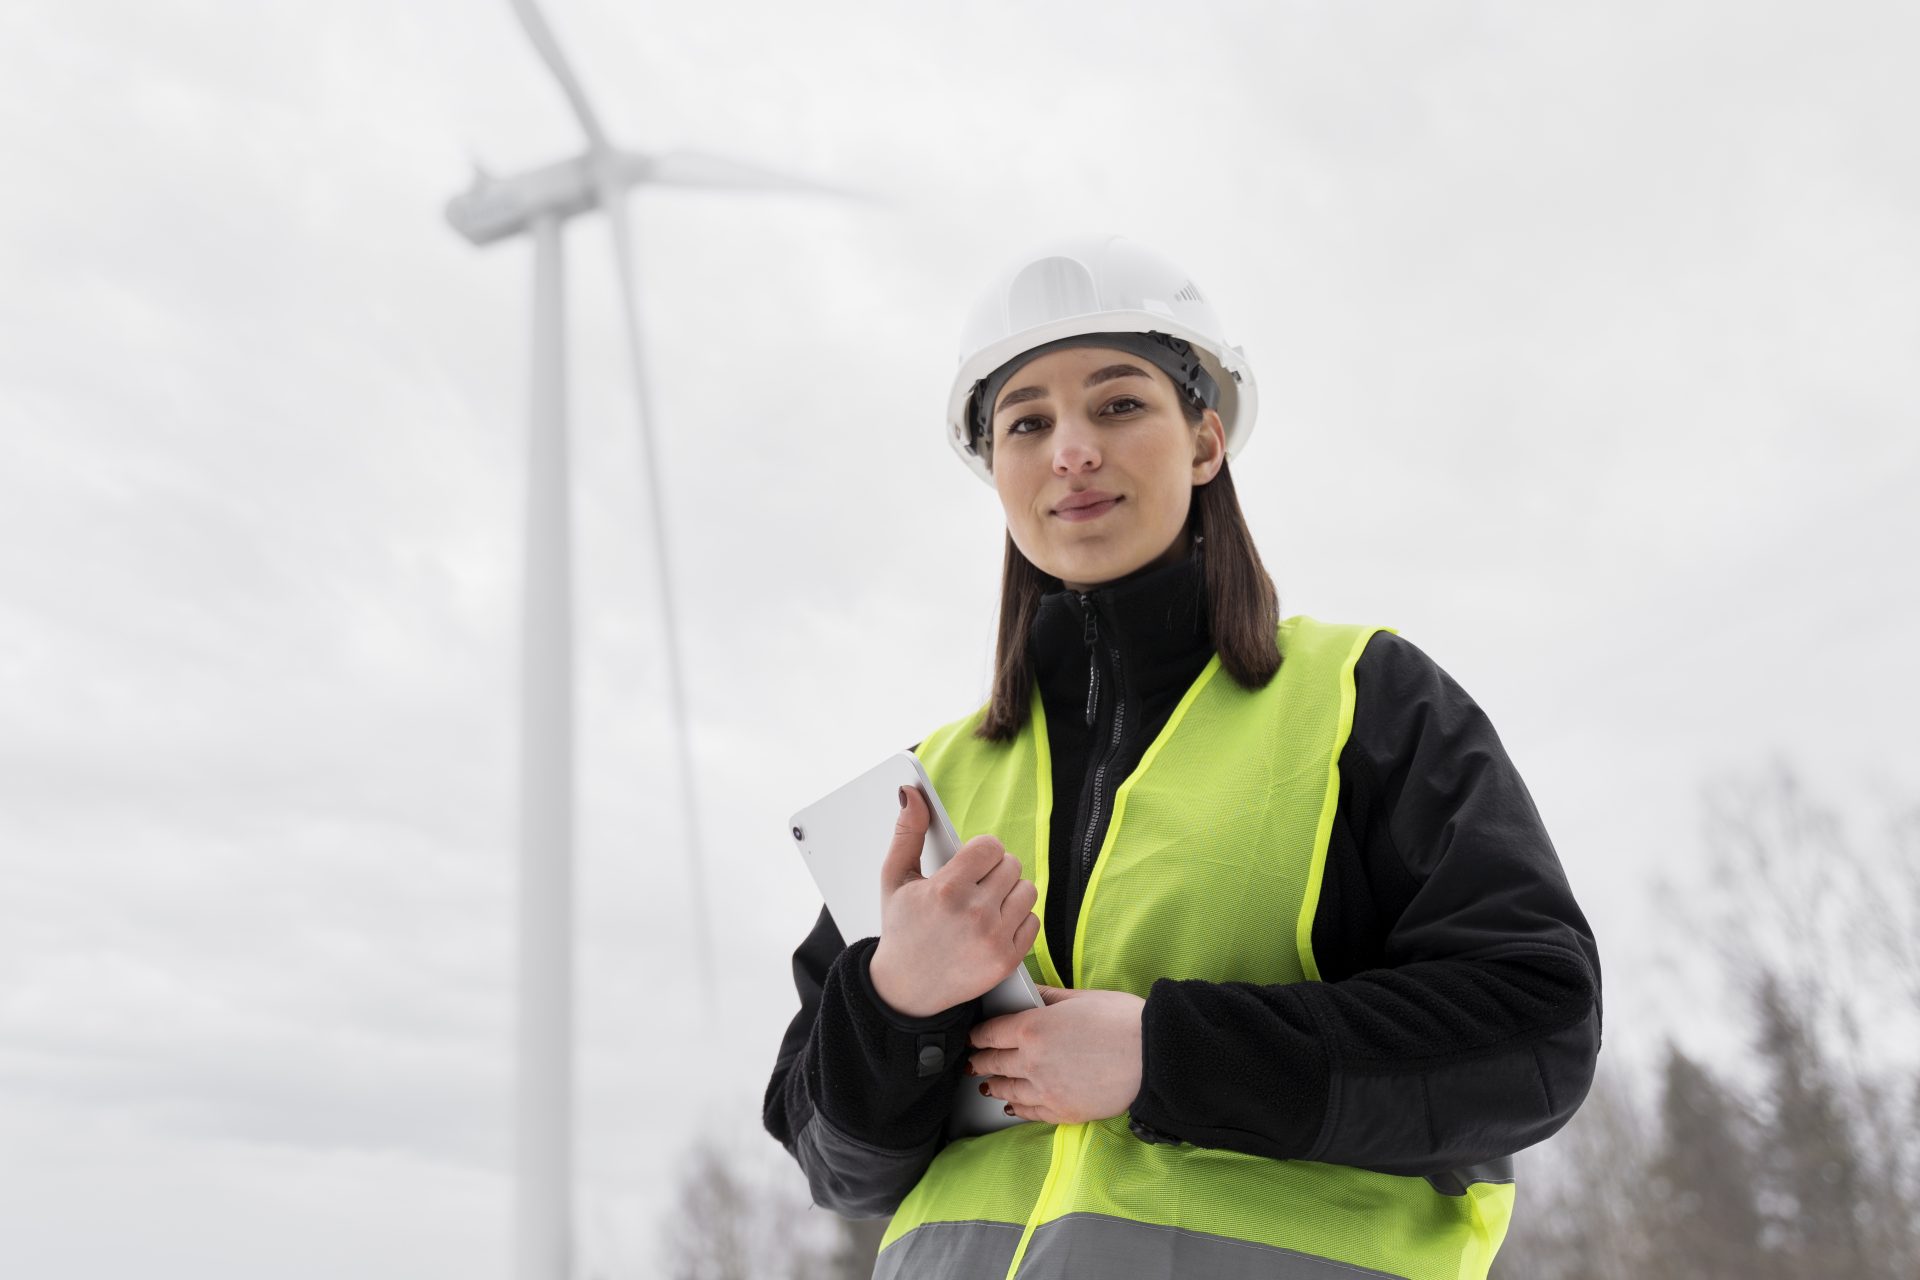 A woman wearing a helmet, safety vest and clipboard stands in front of a wind turbine and smiles into the camera.